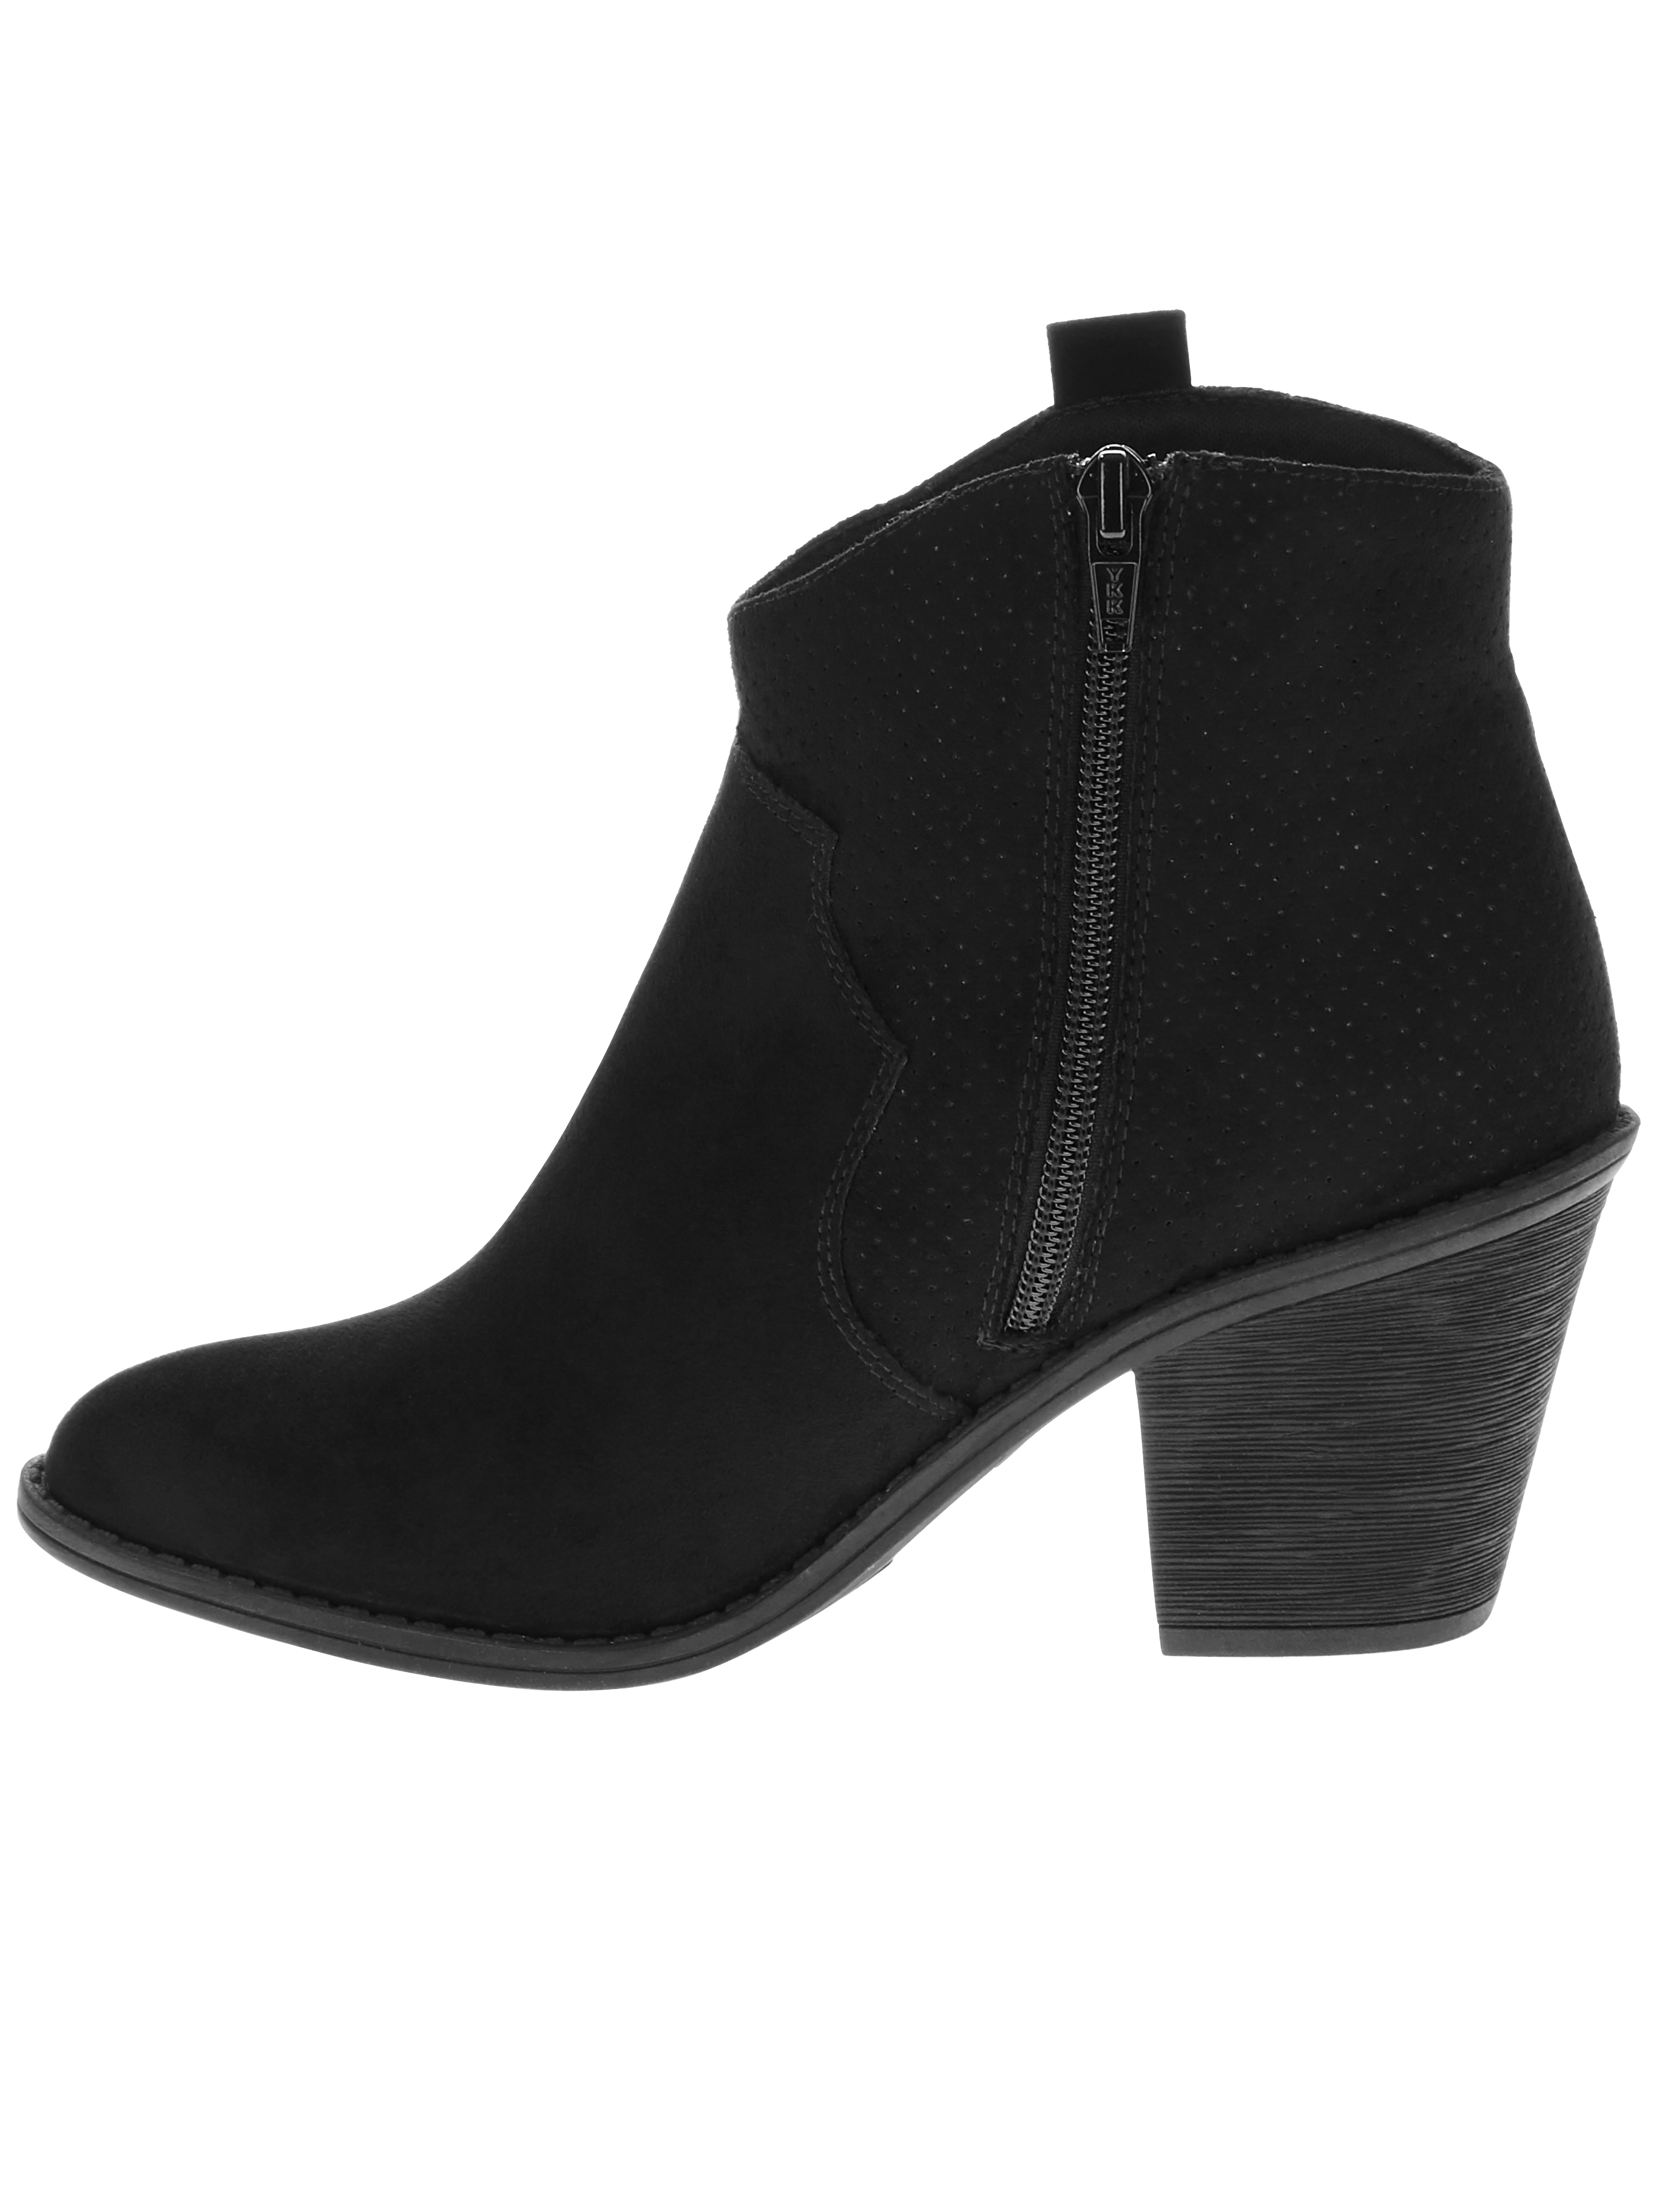 Time and Tru Women's Western Style Boot - image 2 of 6